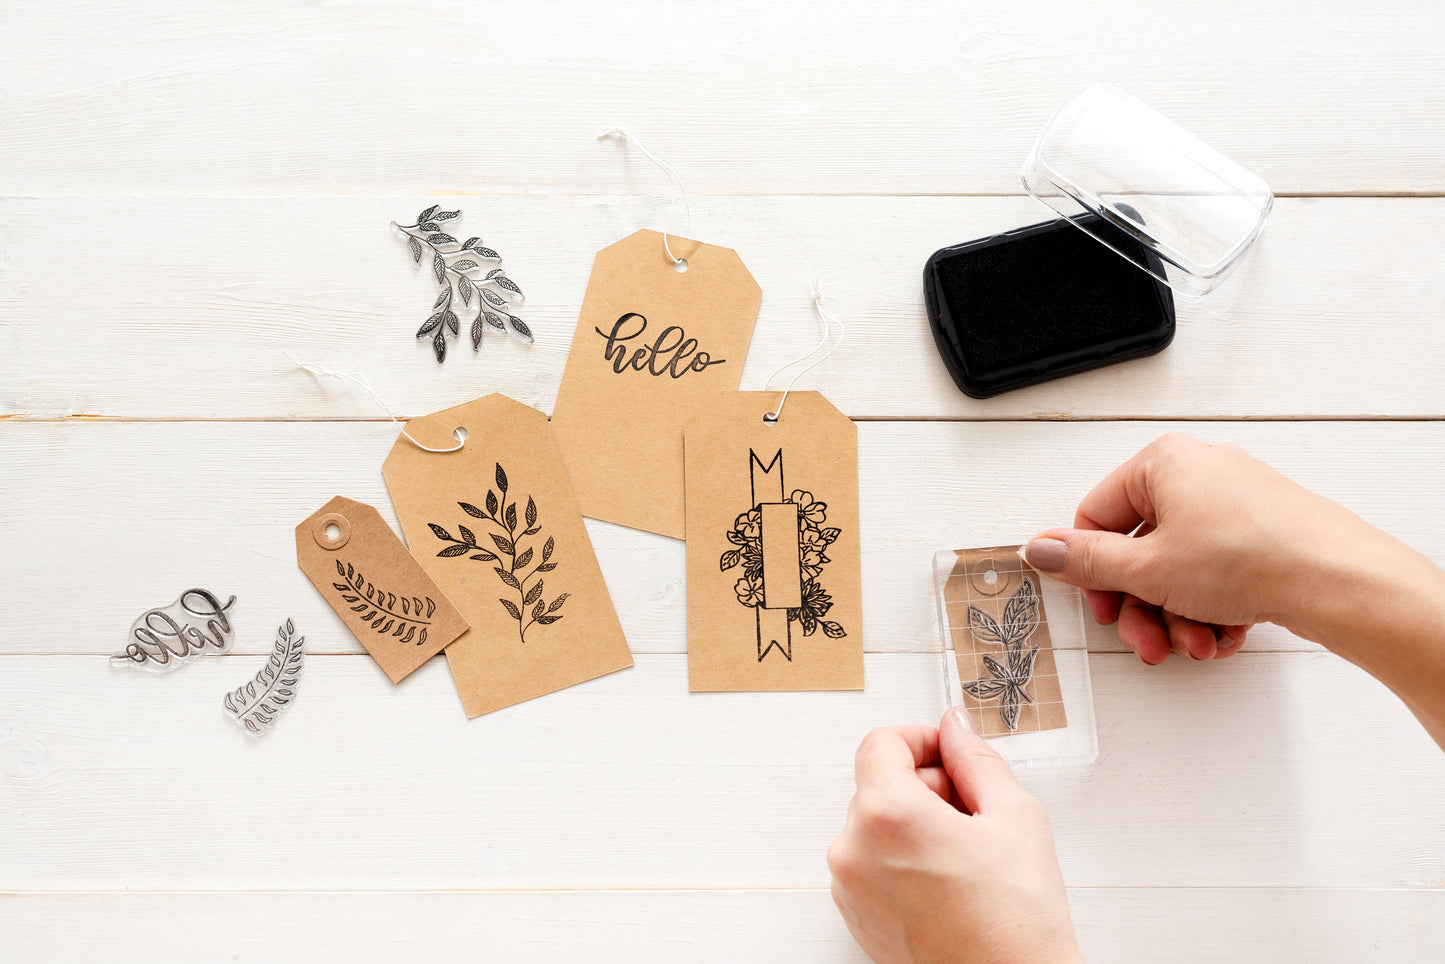 Kelly Creates Acrylic Traceable Stamps-Florals